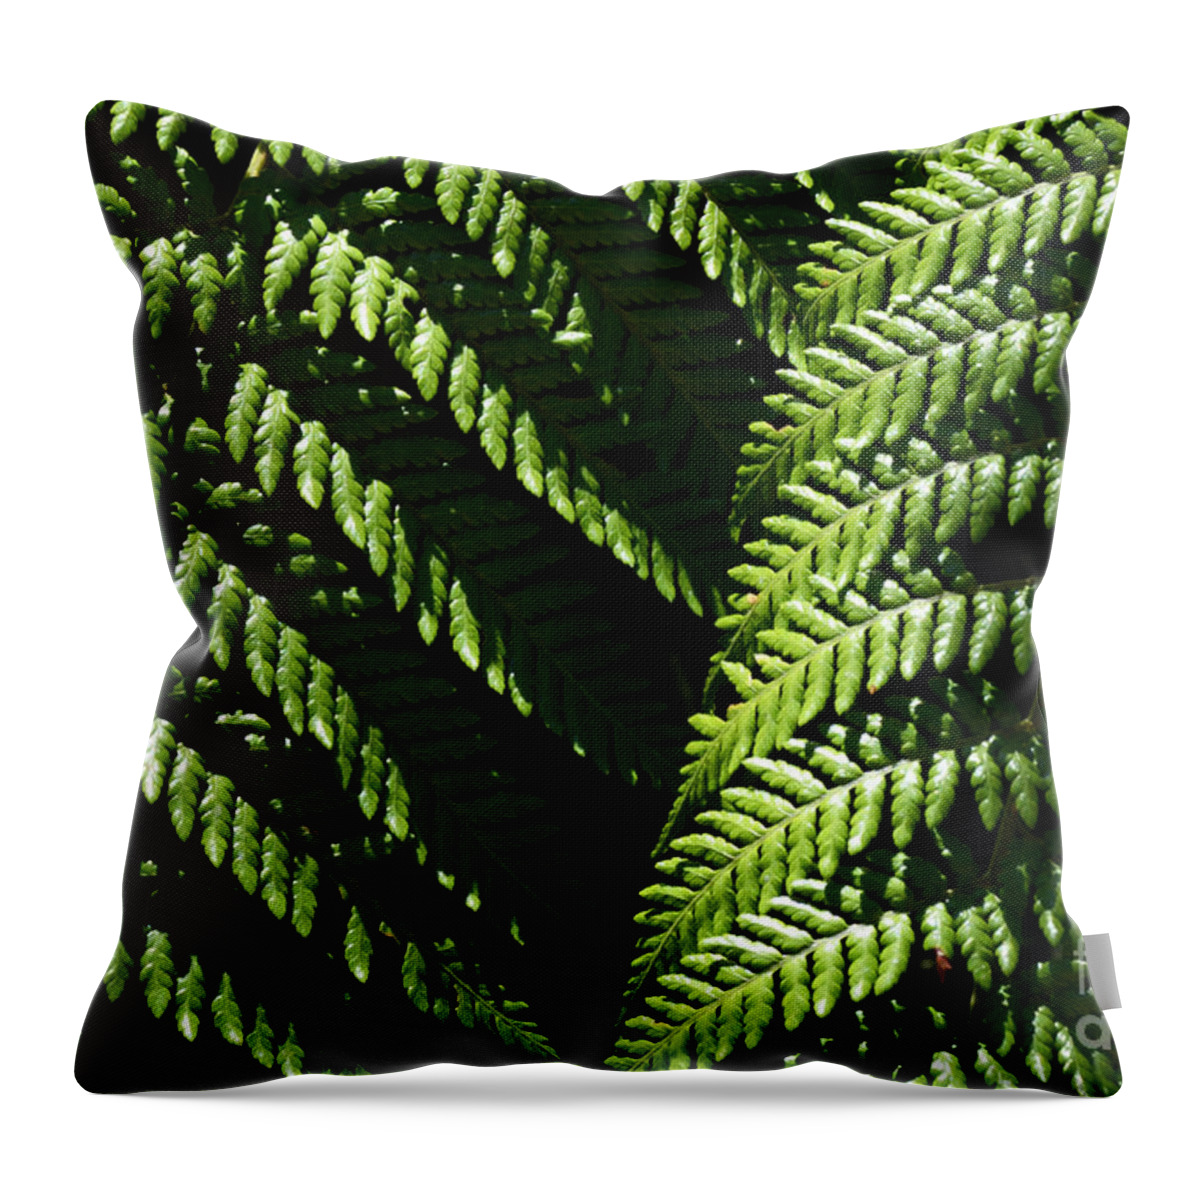 Fern Throw Pillow featuring the photograph Beauty Of Nature Fern 2 by Bob Christopher